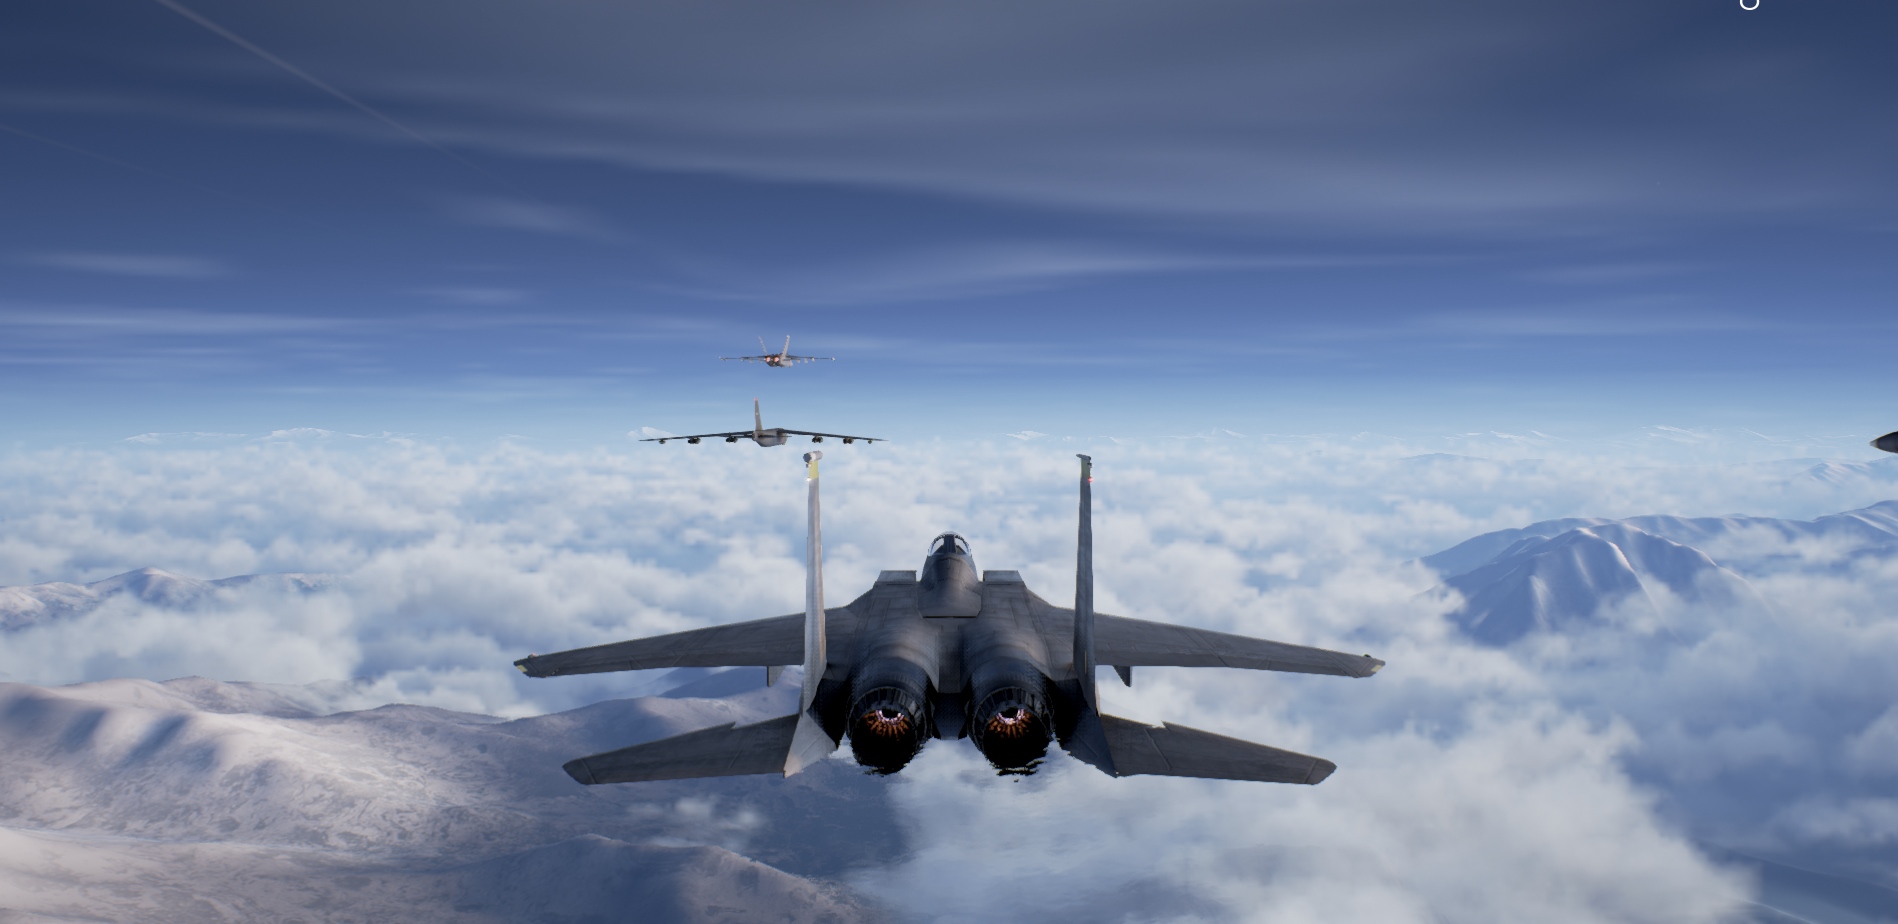 download free project wingman ps4